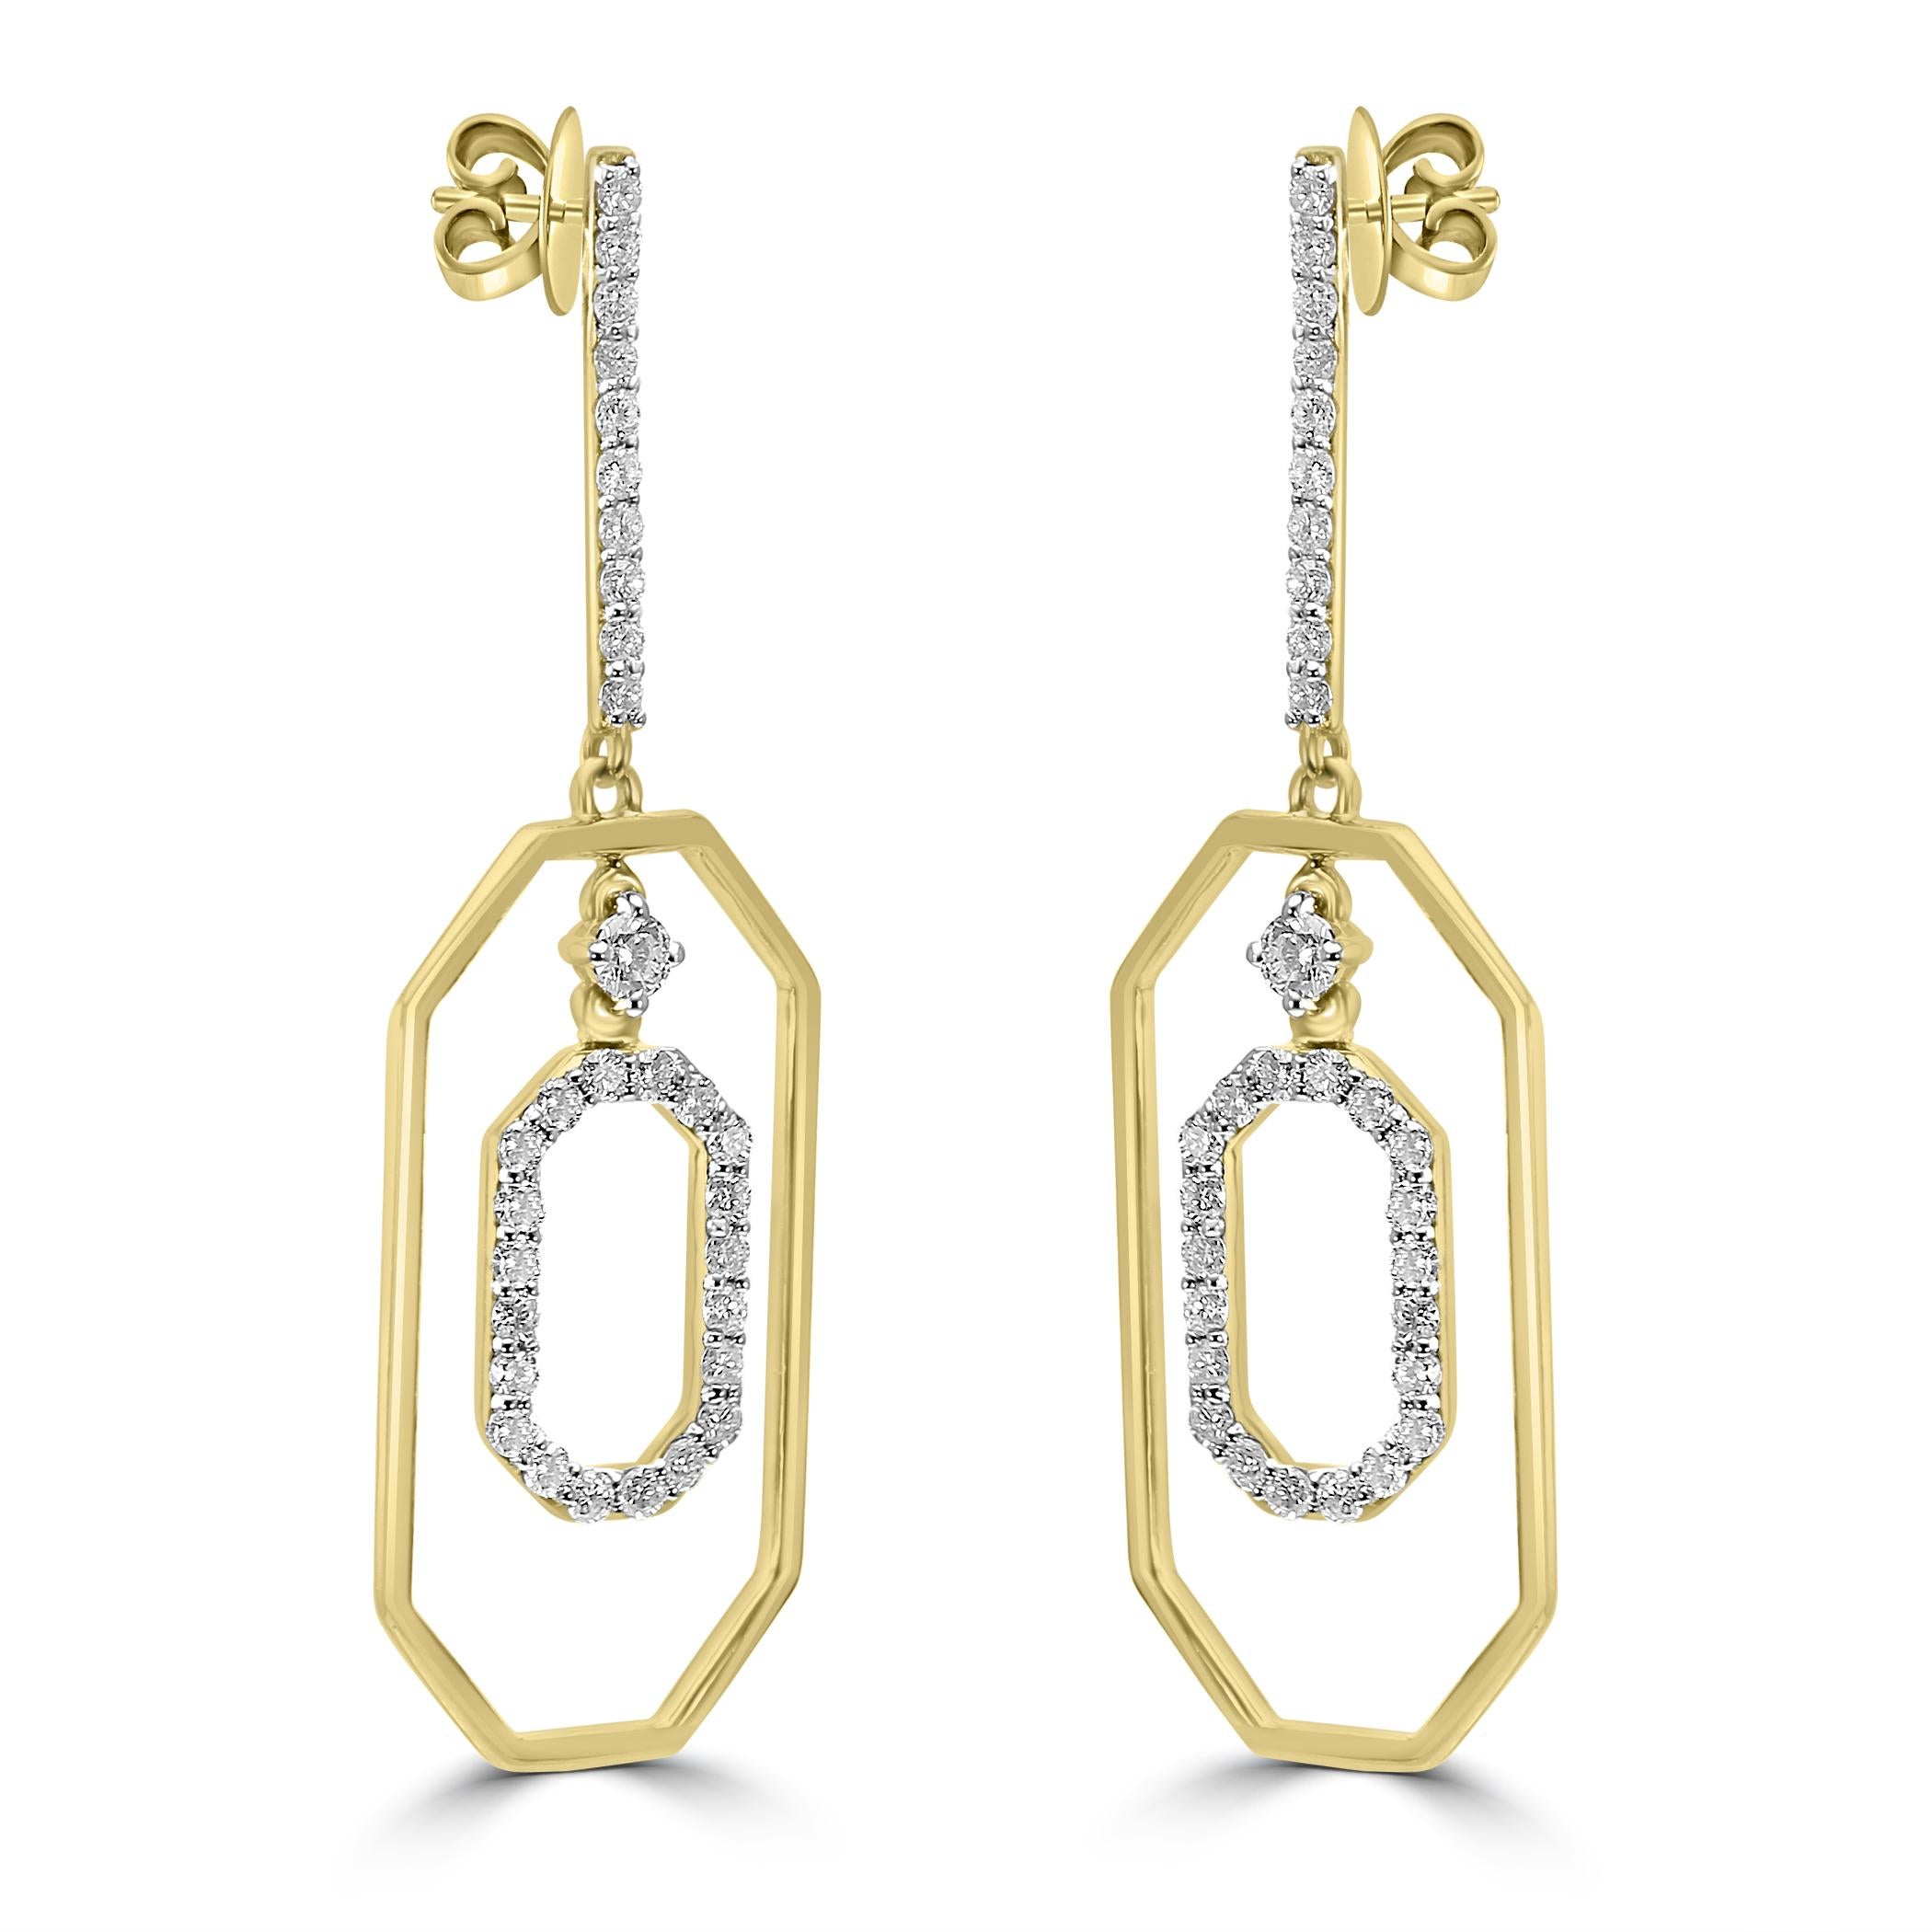 Step up your fashion with our fashion dangle earrings, an expression of sophistication and glamour. These earrings feature a cascade of White Diamond Rounds, totaling 0.69 carats, meticulously set to create an ensemble of brilliance and